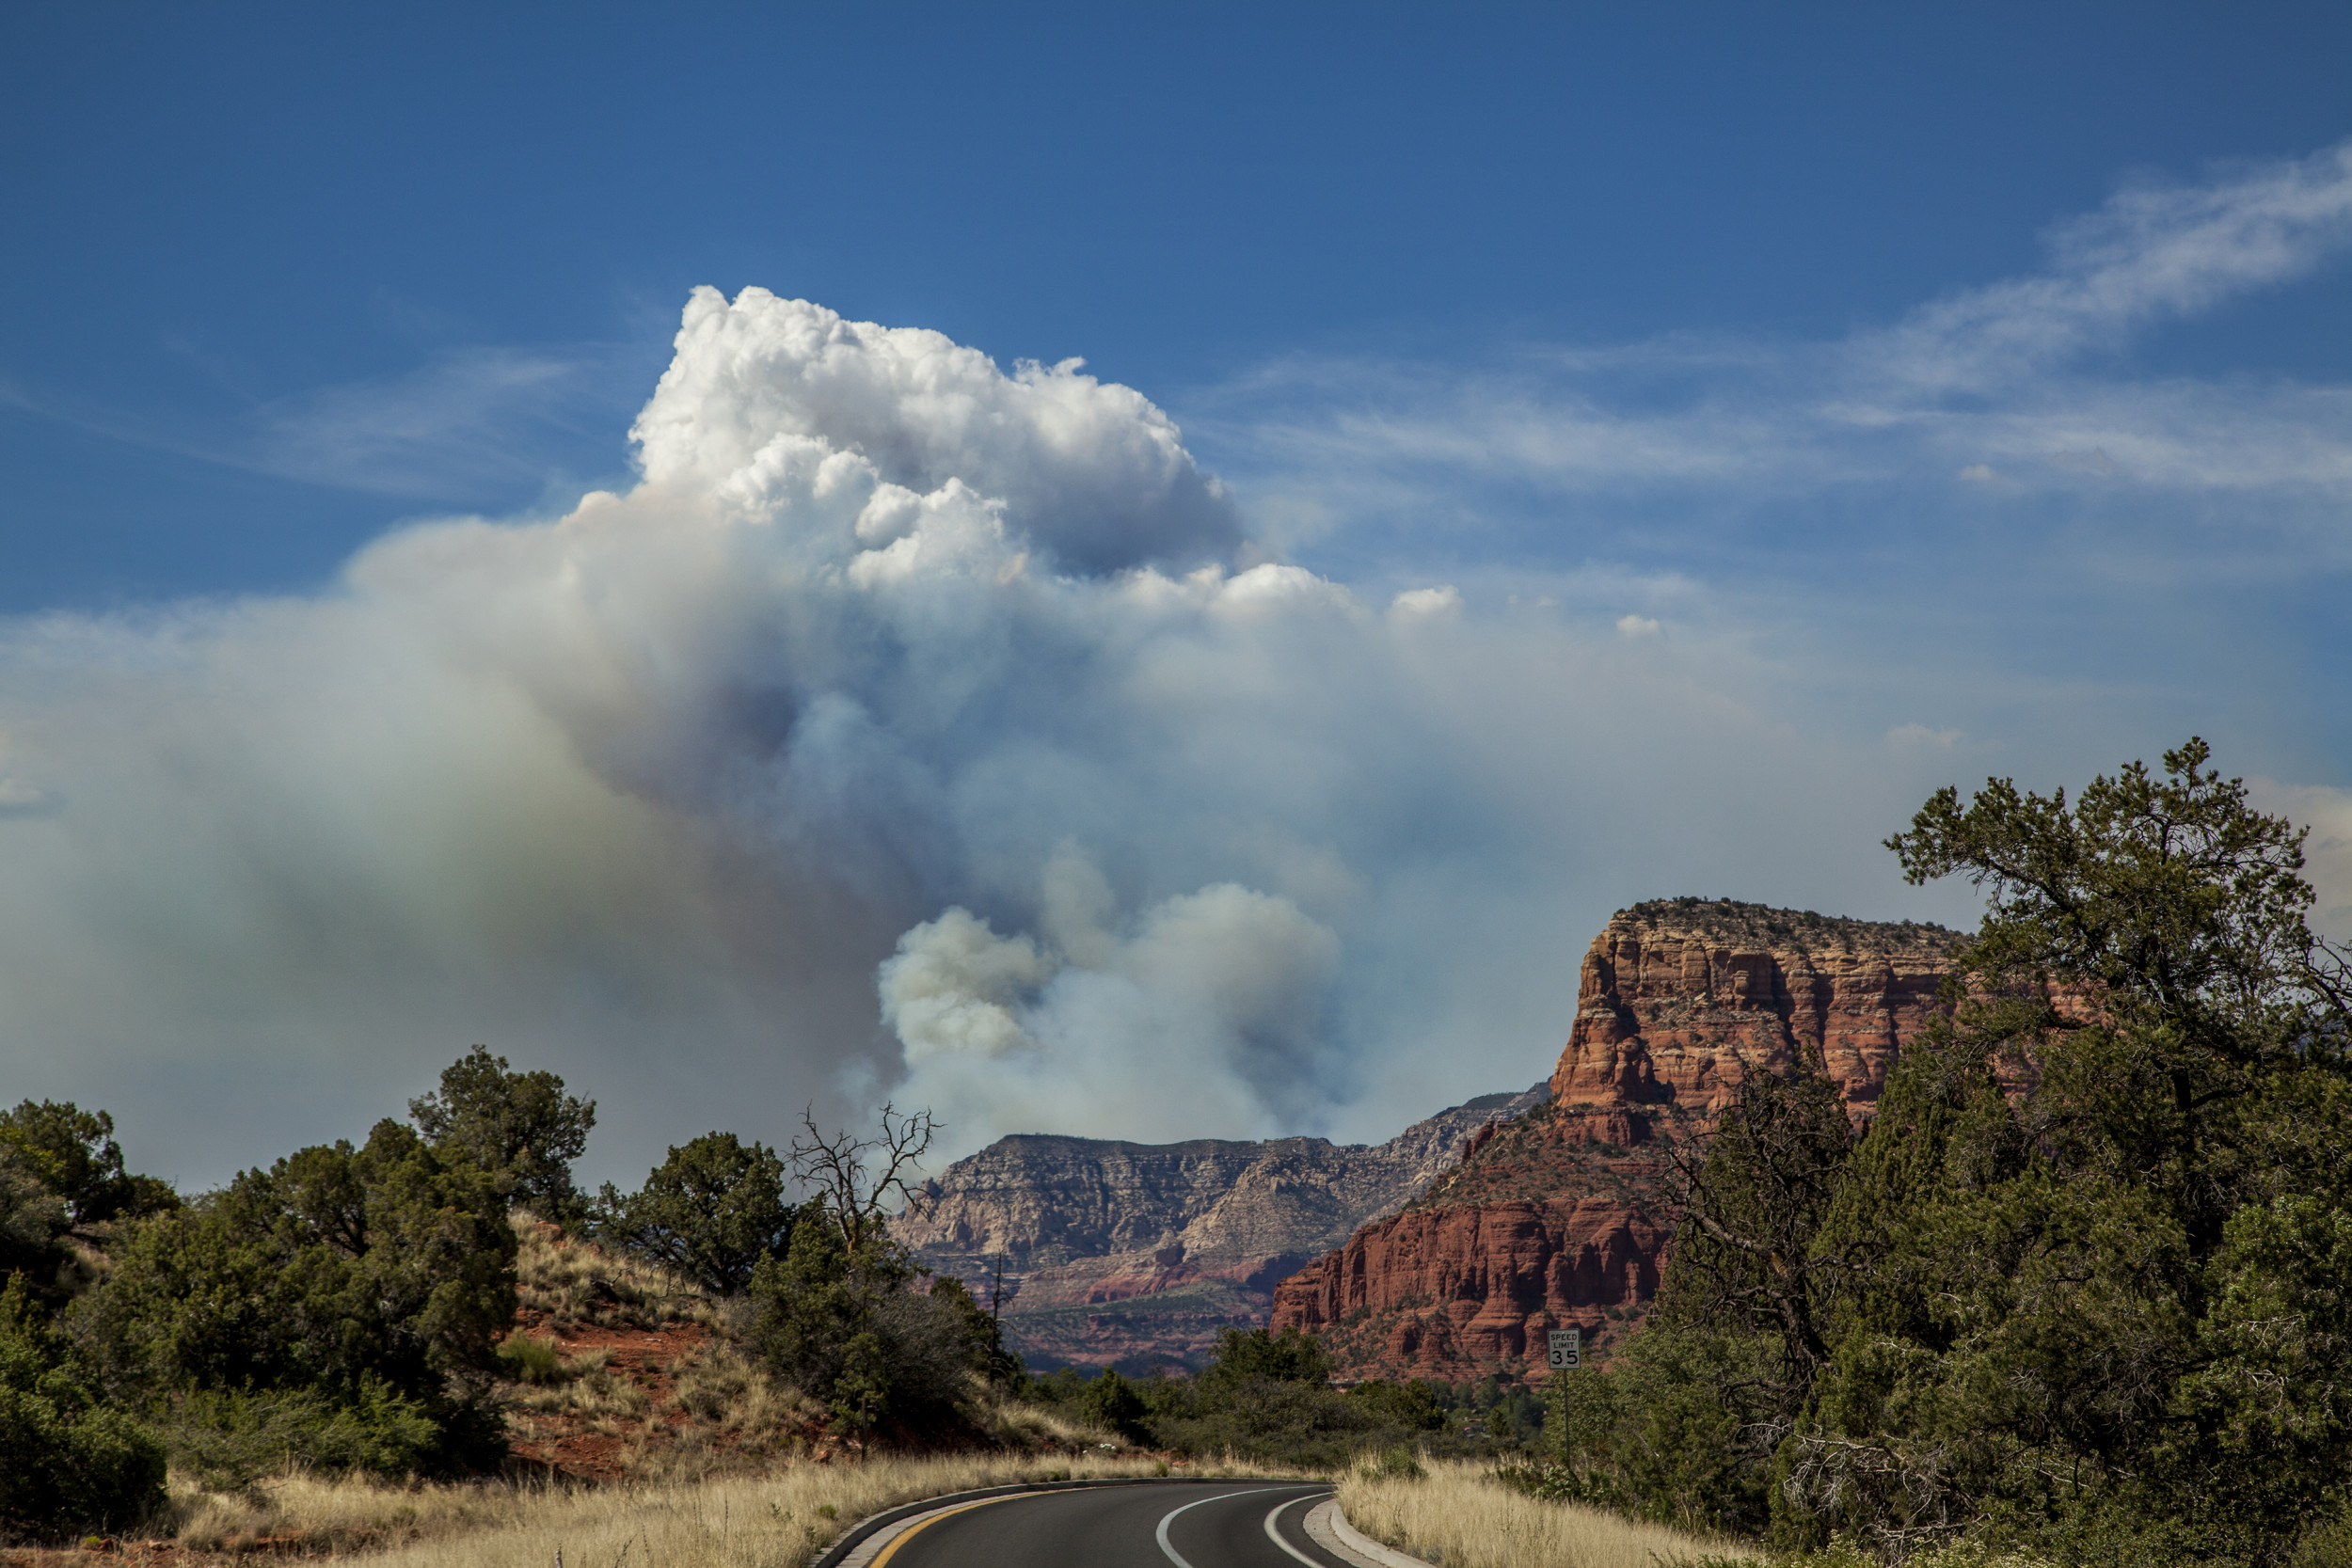 Bush Fire Update Arizona Wildfire Grows To Over 64,000 Acres, Nearly